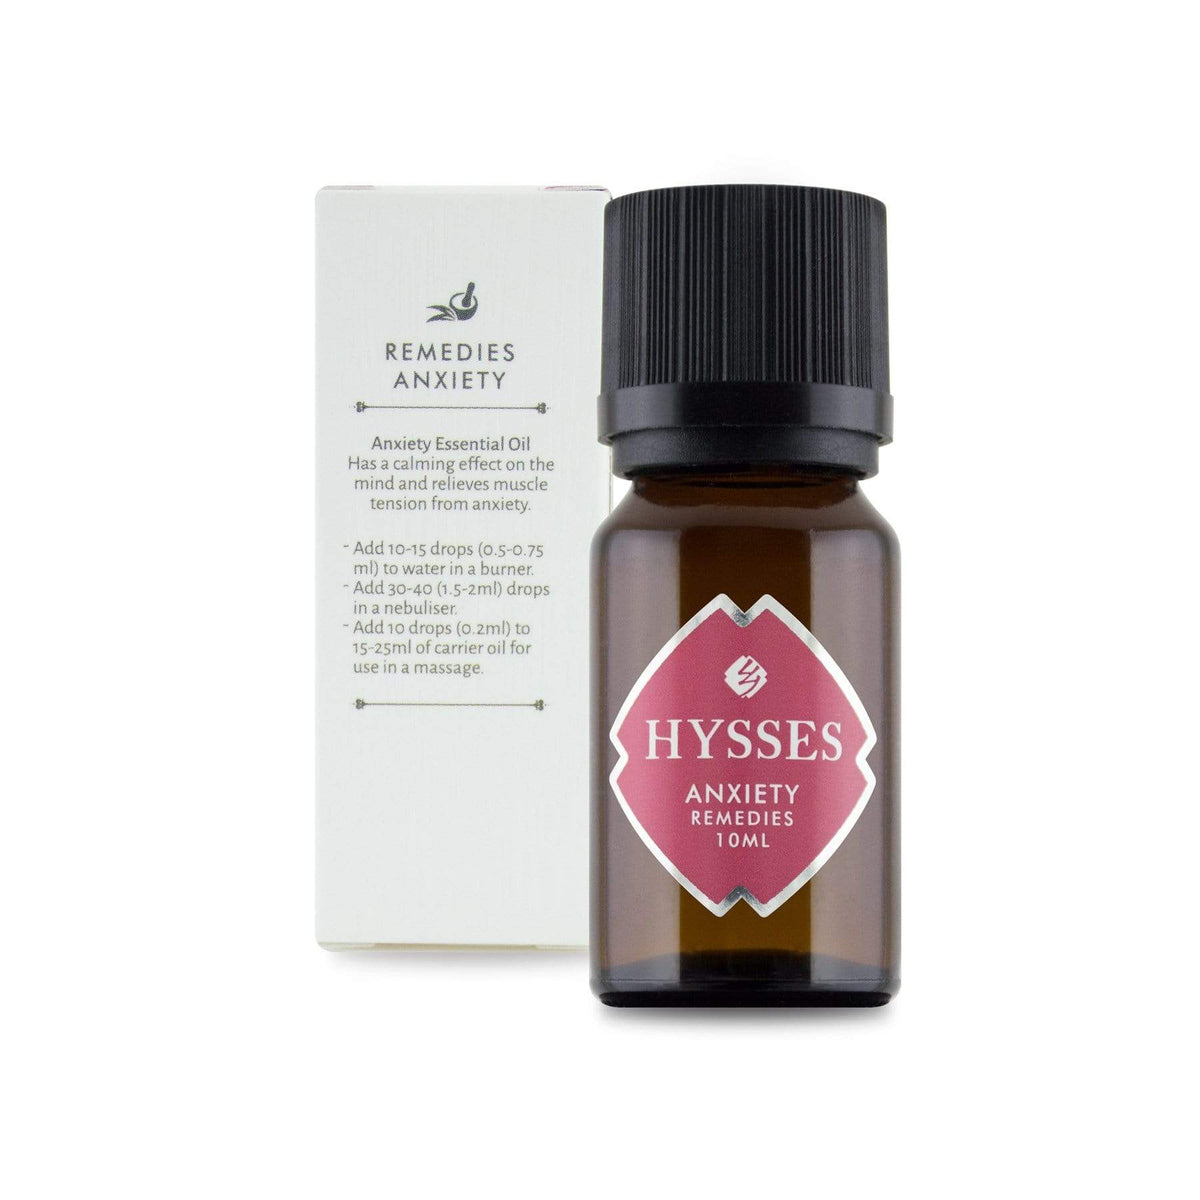 Hysses Essential Oil Remedies, Anxiety